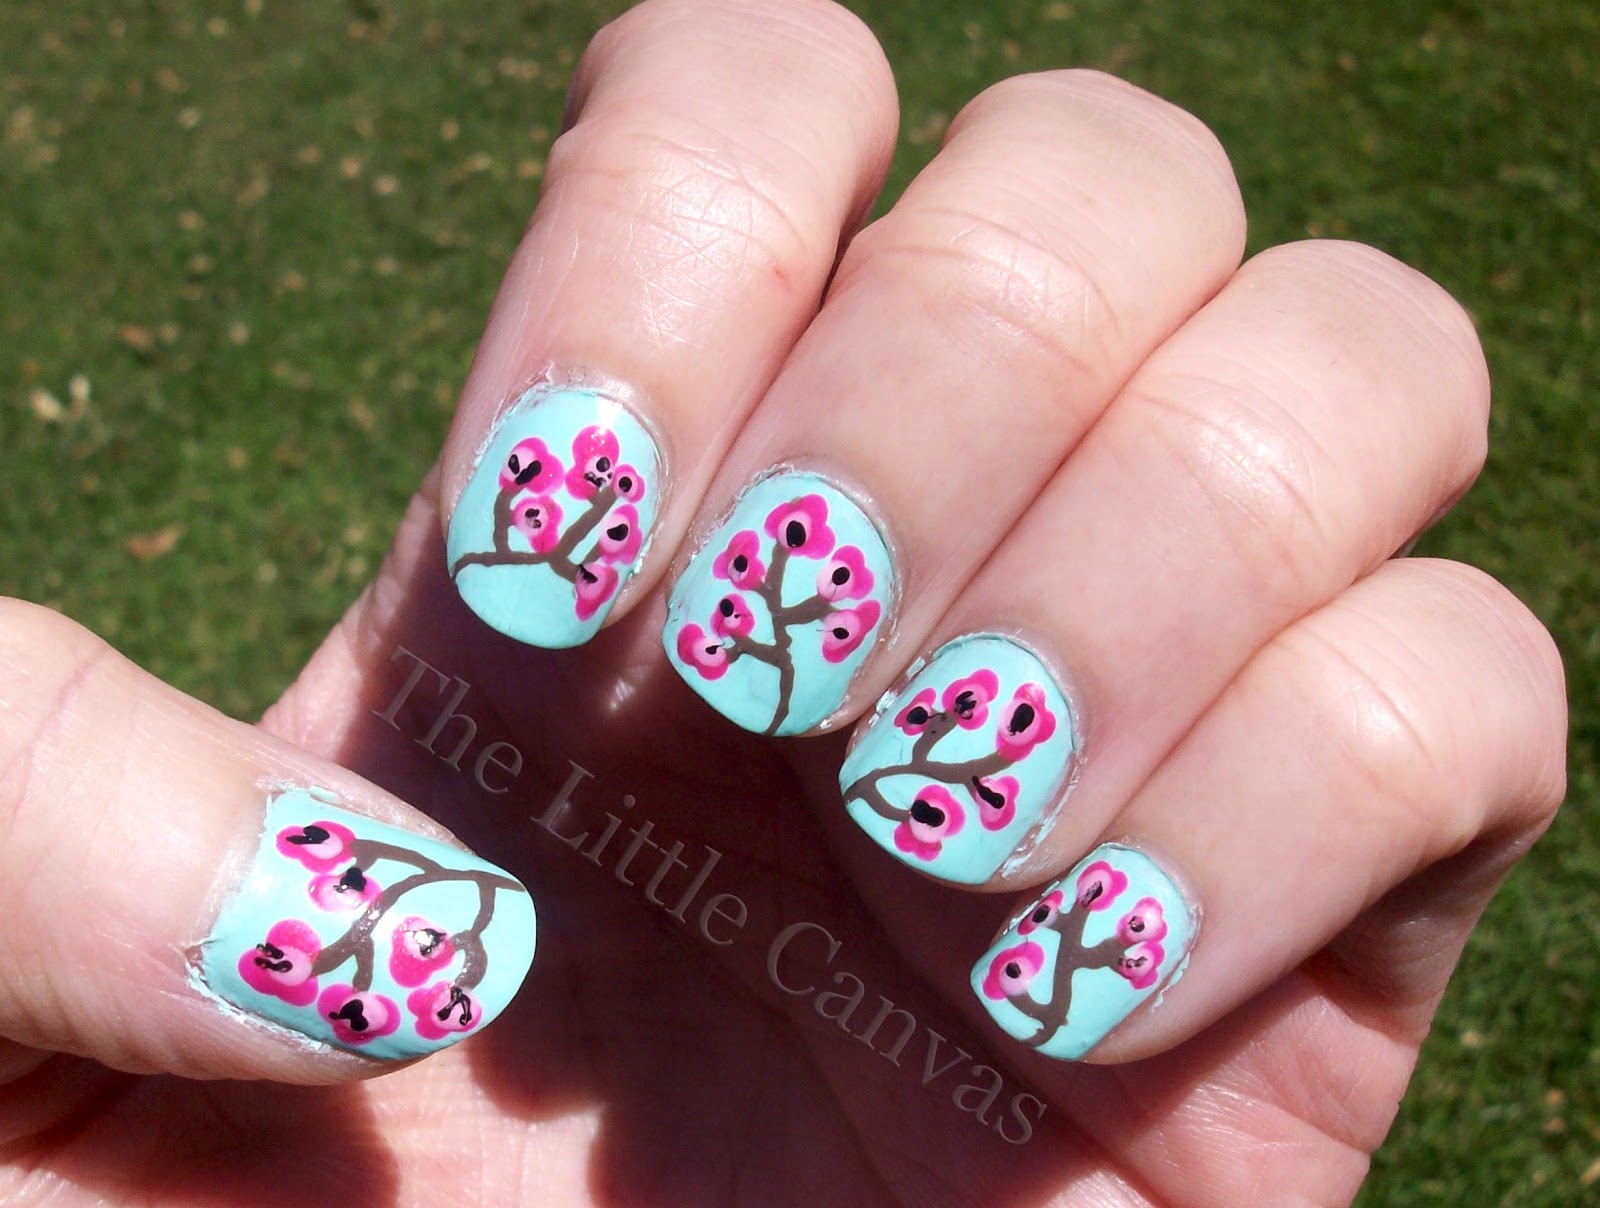 1. Nail Art Blossom Hill Prices - wide 5